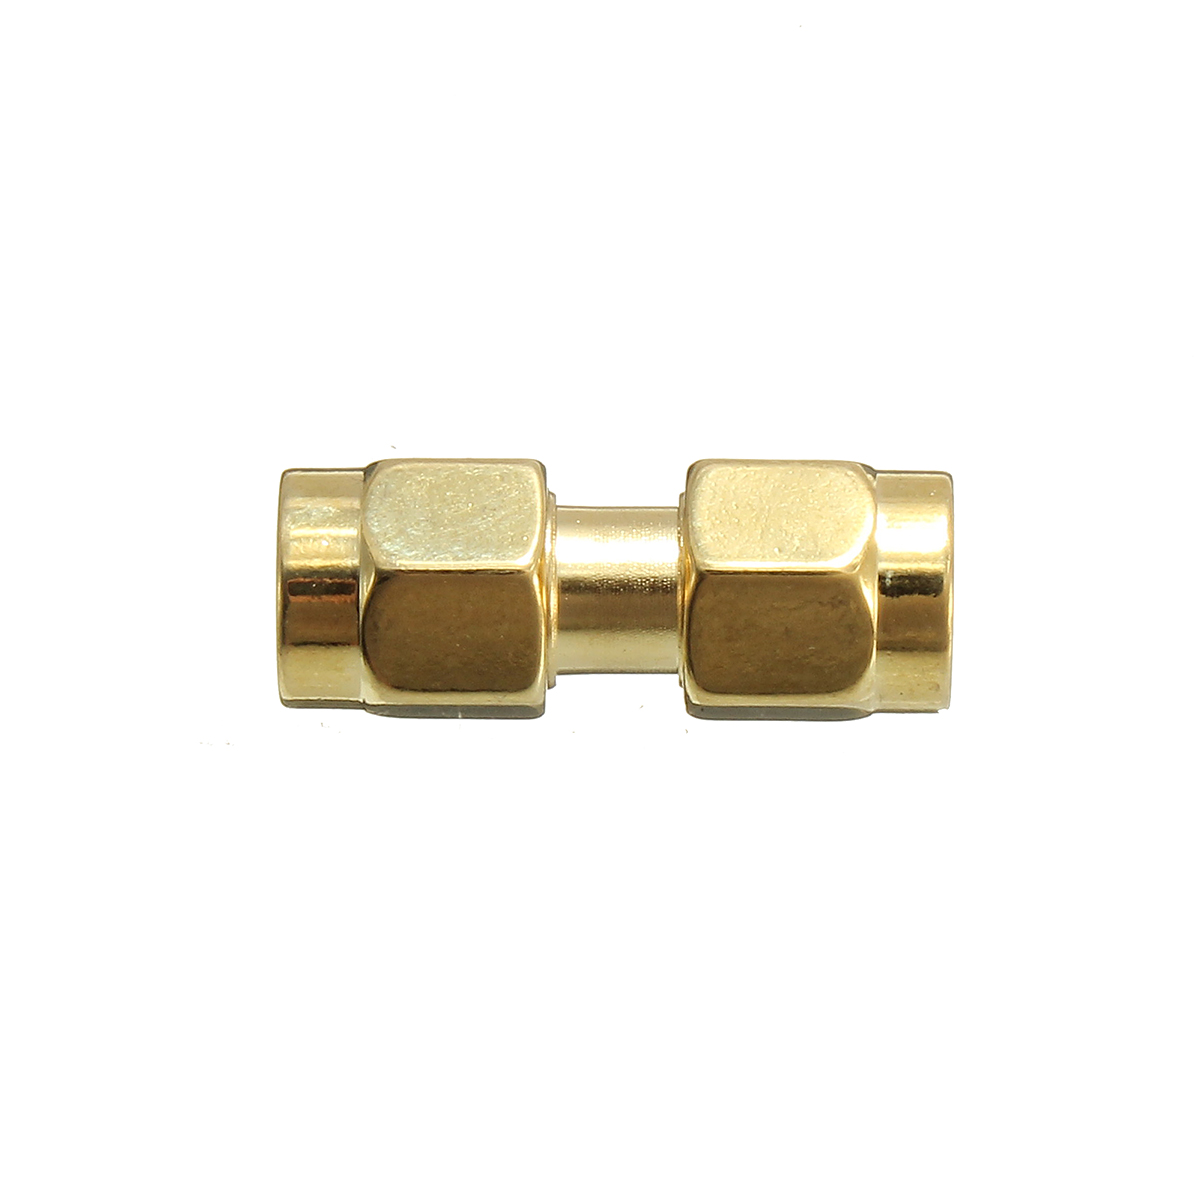 Excellwayreg-CA01-2Pcs-Copper-SMA-Male-To-SMA-Male-Plug-RF-Coaxial-Adapter-Connector-1073343-8